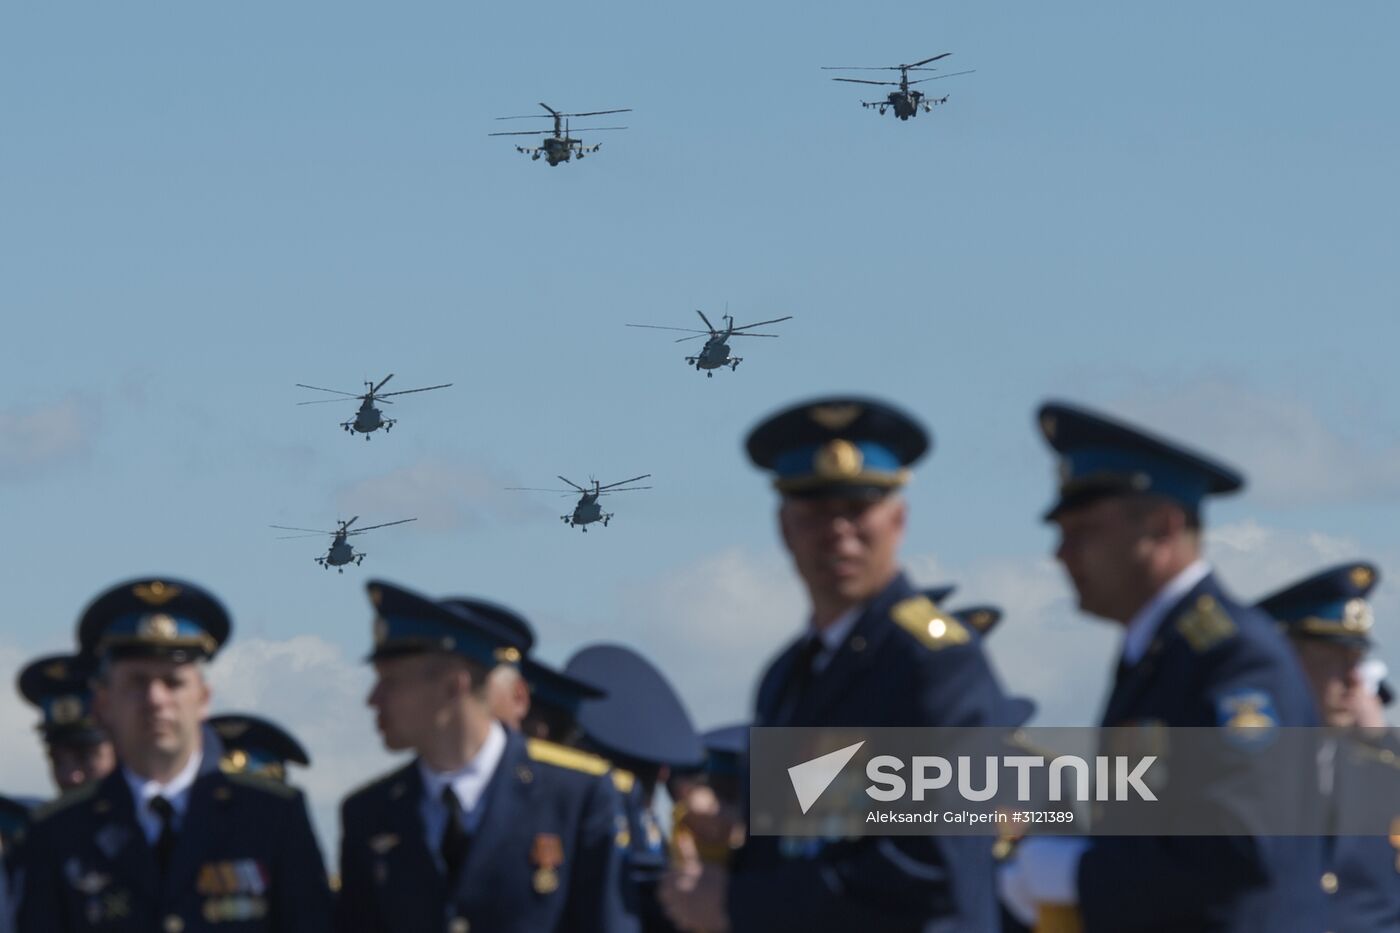 Events to mark 75th anniversary of Day of Establishing the 6th Army of the Air Force and Air Defense in Leningrad Region